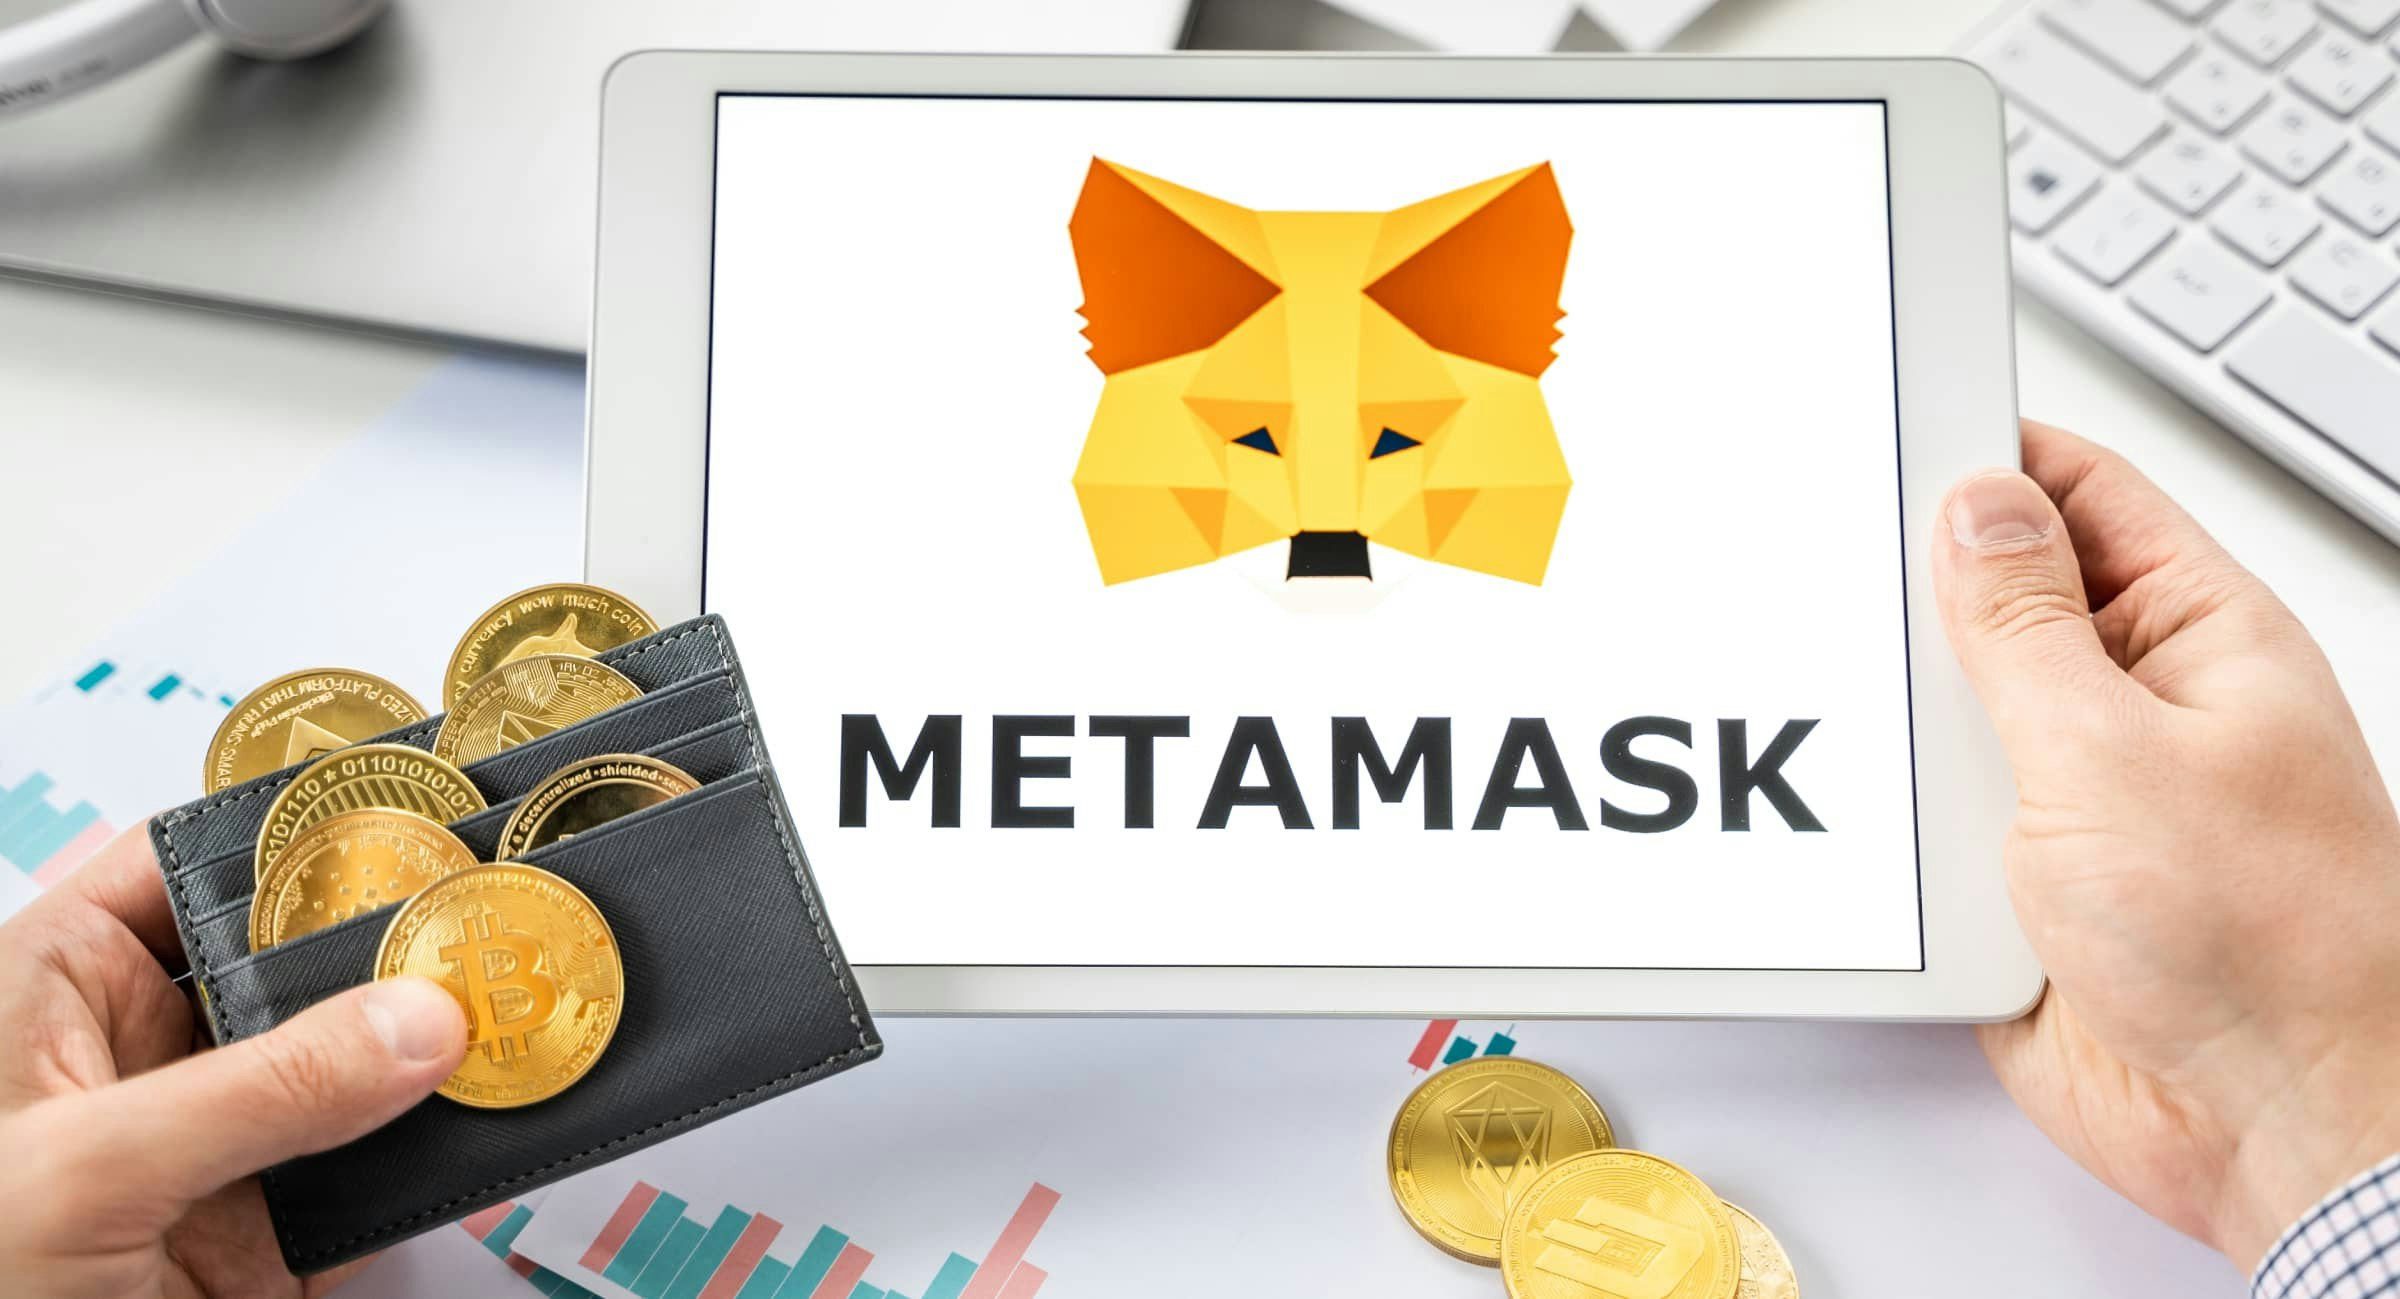 Is the MetaMask wallet for Ethereum only?